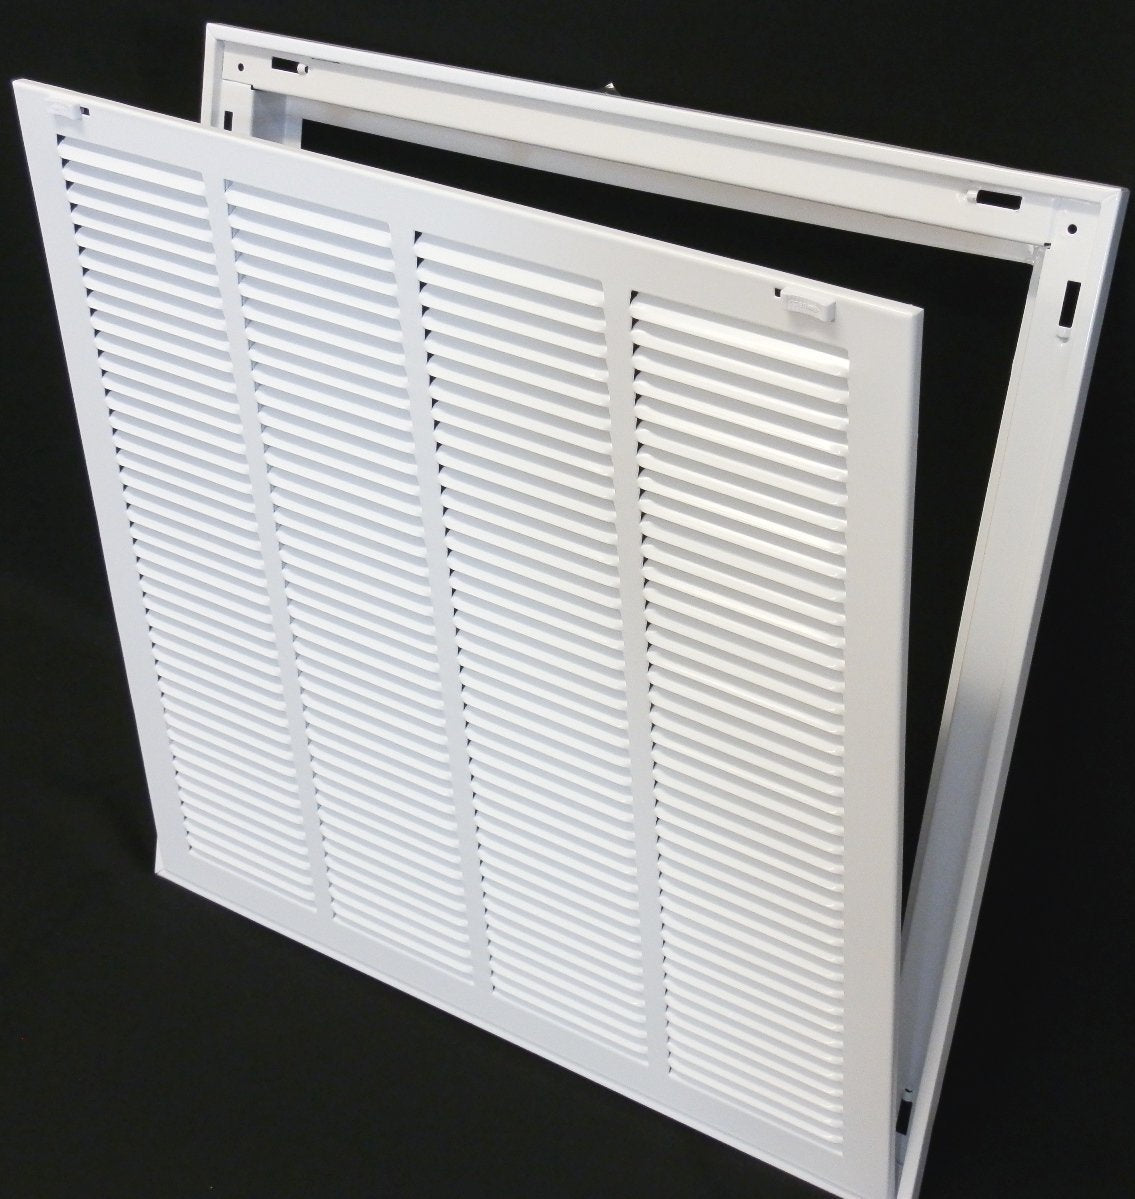 12&quot; X 14&quot; Steel Return Air Filter Grille for 1&quot; Filter - Removable Frame - [Outer Dimensions: 14 5/8&quot; X 16 5/8&quot;]